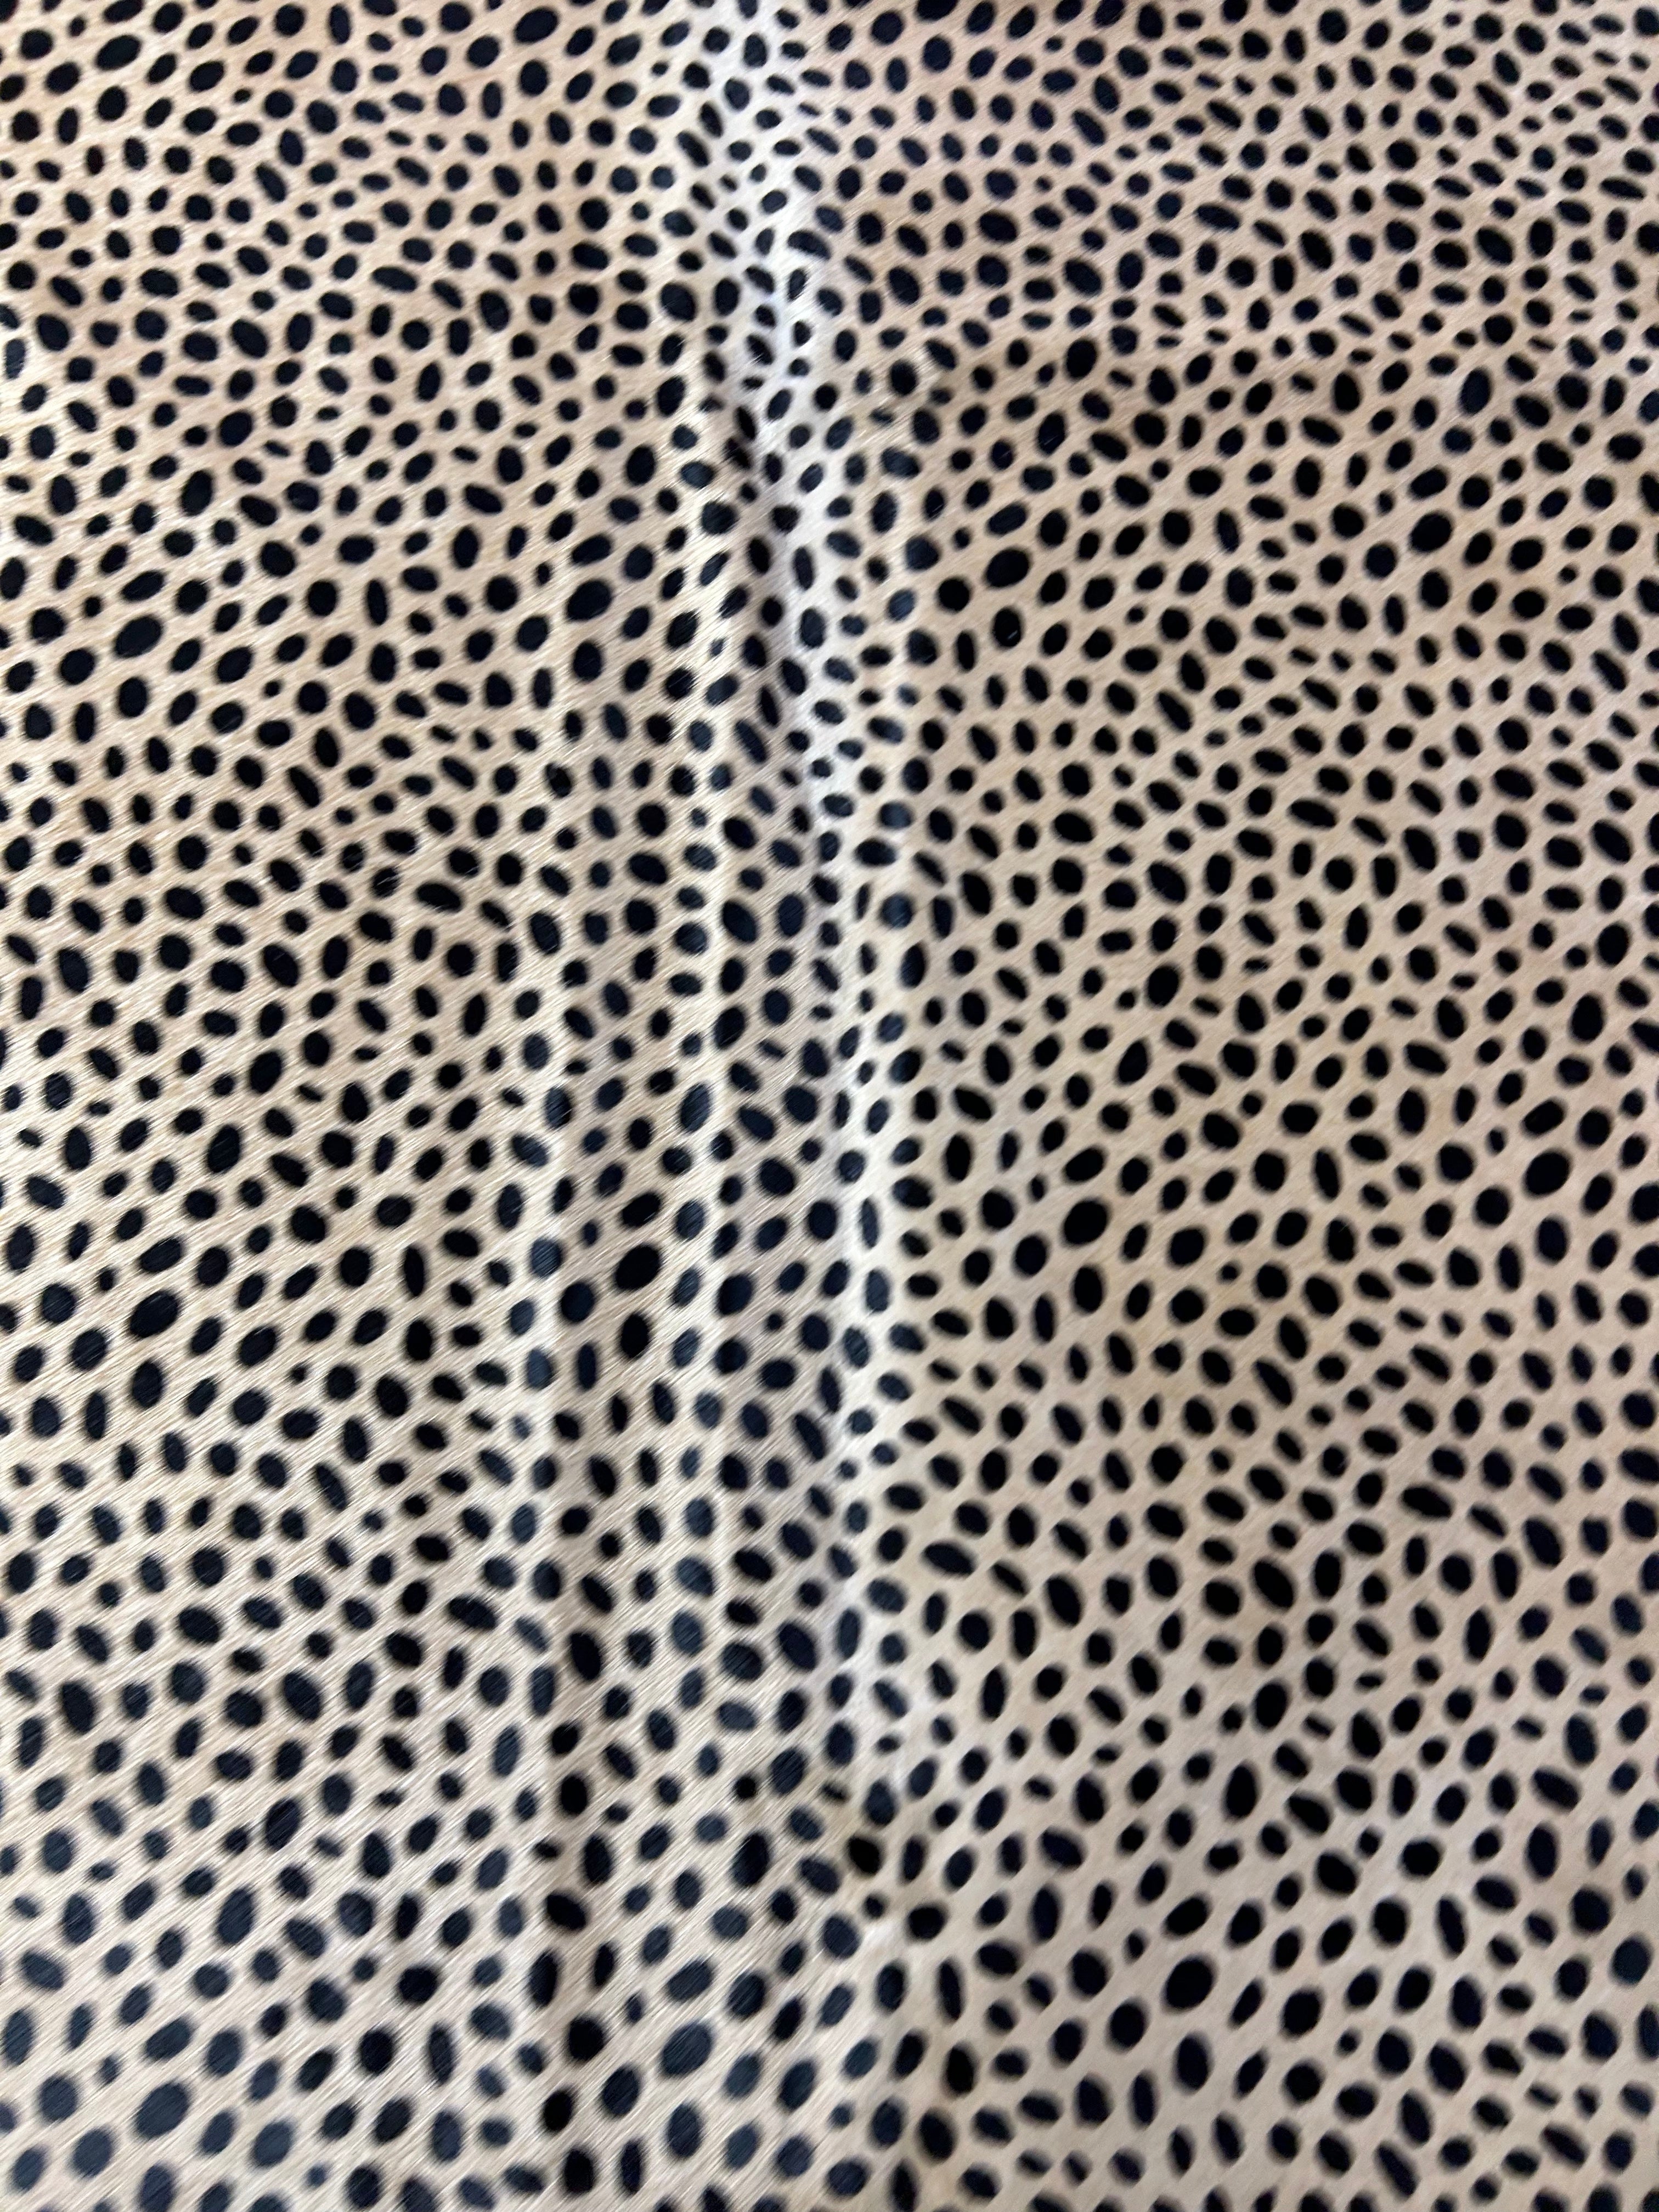 Cheetah Print Cowhide Rug (golden beige background/ PERFECT QUALITY) Size: 7.2x6.2 feet D-092